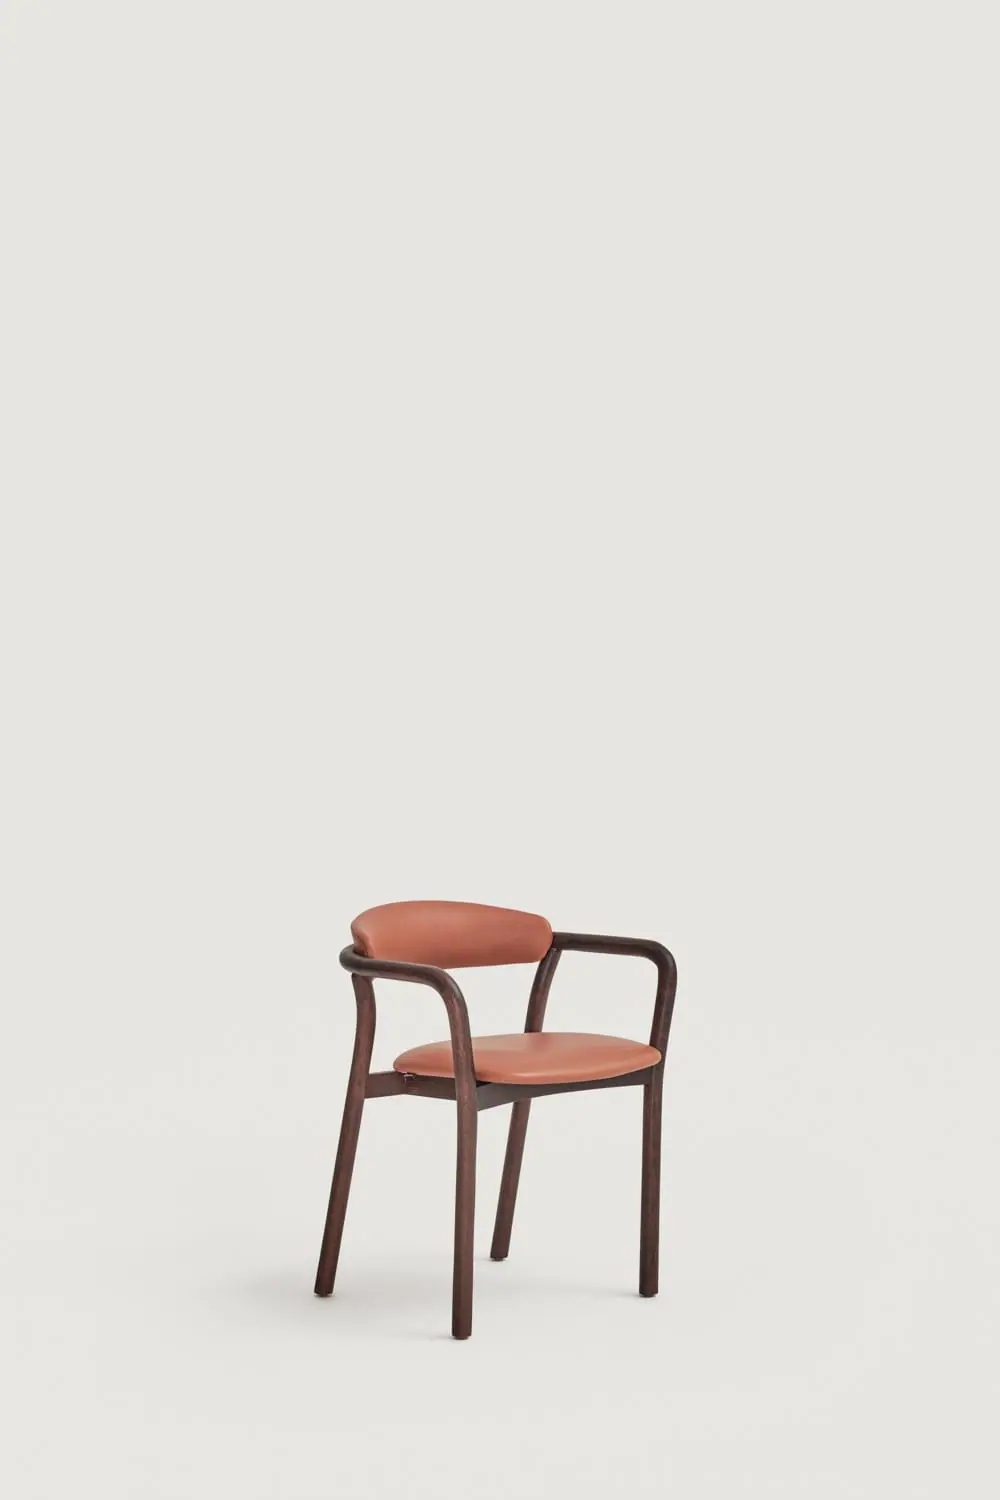 capdell-cecile-chair-02